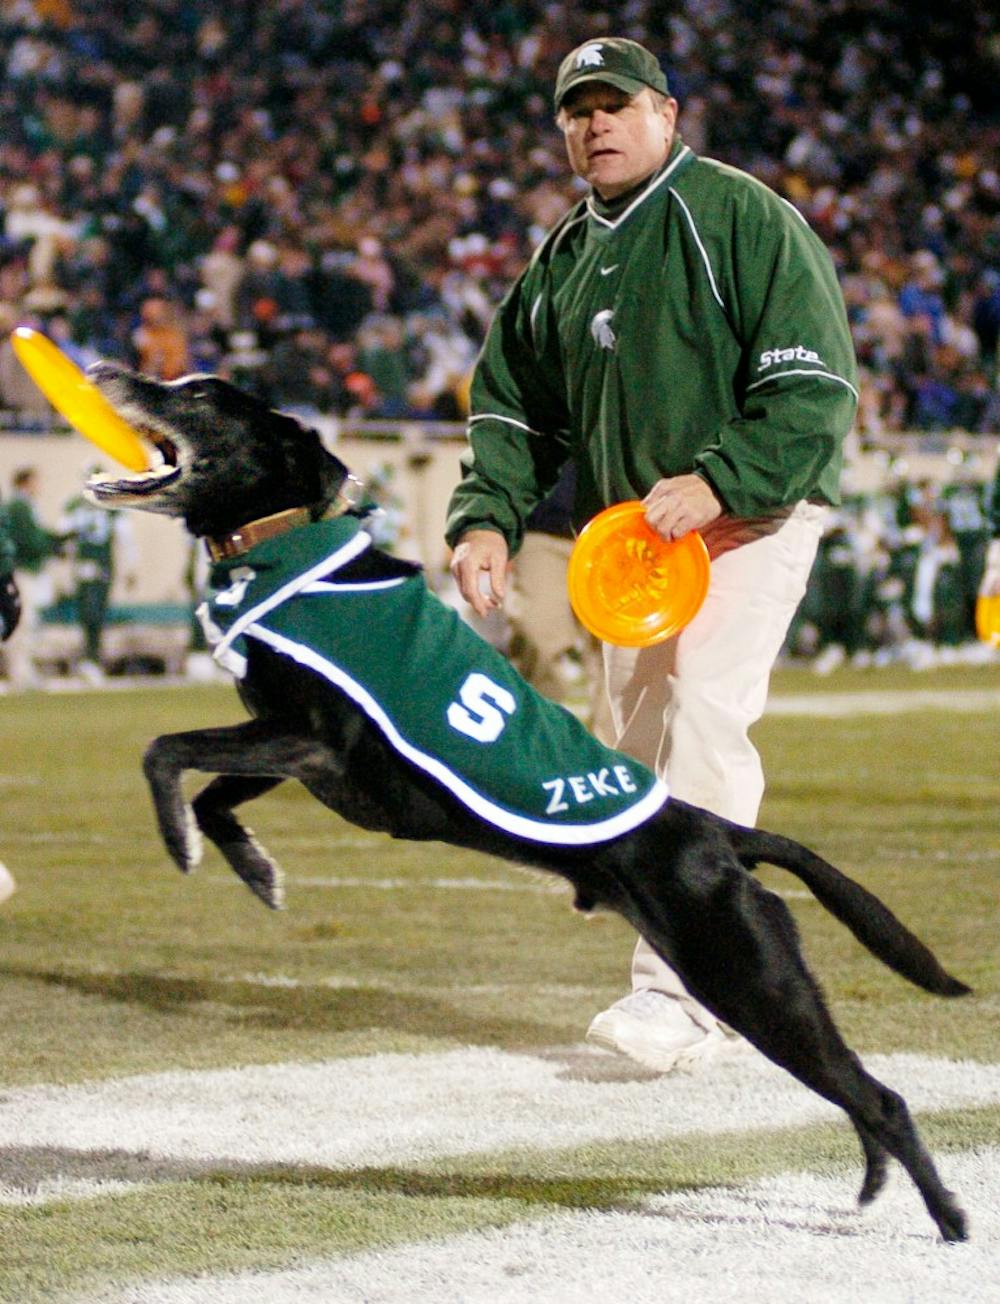 Zeke entertains the crowd on Saturday evening during halftime of the game against Penn State at Spartan Stadium. Owner Jim Foley, a Holland resident, prompts Zeke to perform numerous flying disc tricks. Foley later gives away some of the discs, which are ?autographed? with a stamp of Zeke?s paw print. ?[Zeke] thoroughly enjoys himself. When he?s out there, he gives 110 percent. He?s just a dog; he doesn?t know anything about winning or loosing. He just goes out there and has fun.? Jeana-Dee Allen/The State News